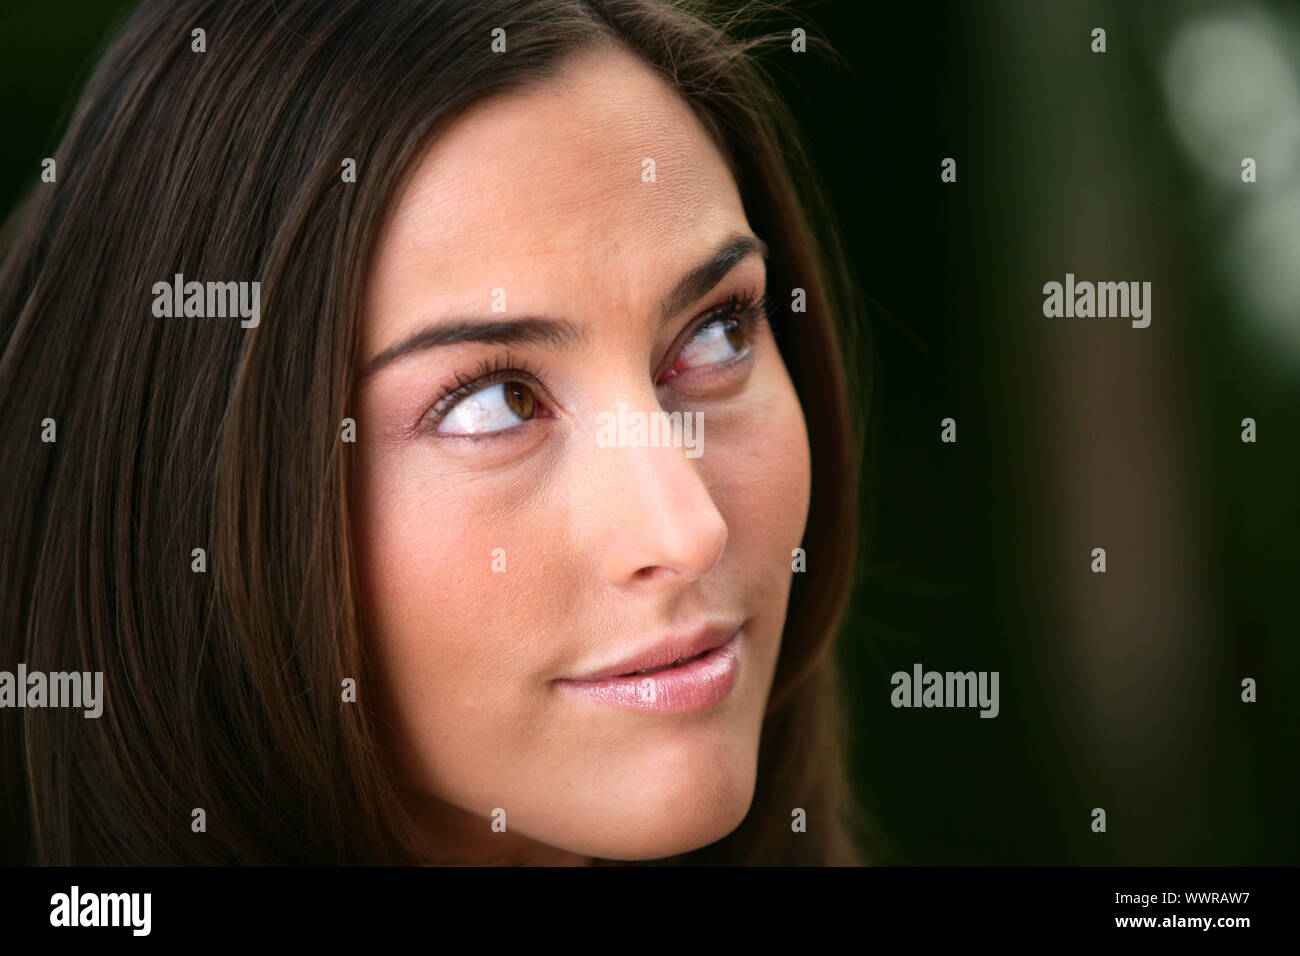 Portrait of a woman looking out of the corner of her eye Stock Photo